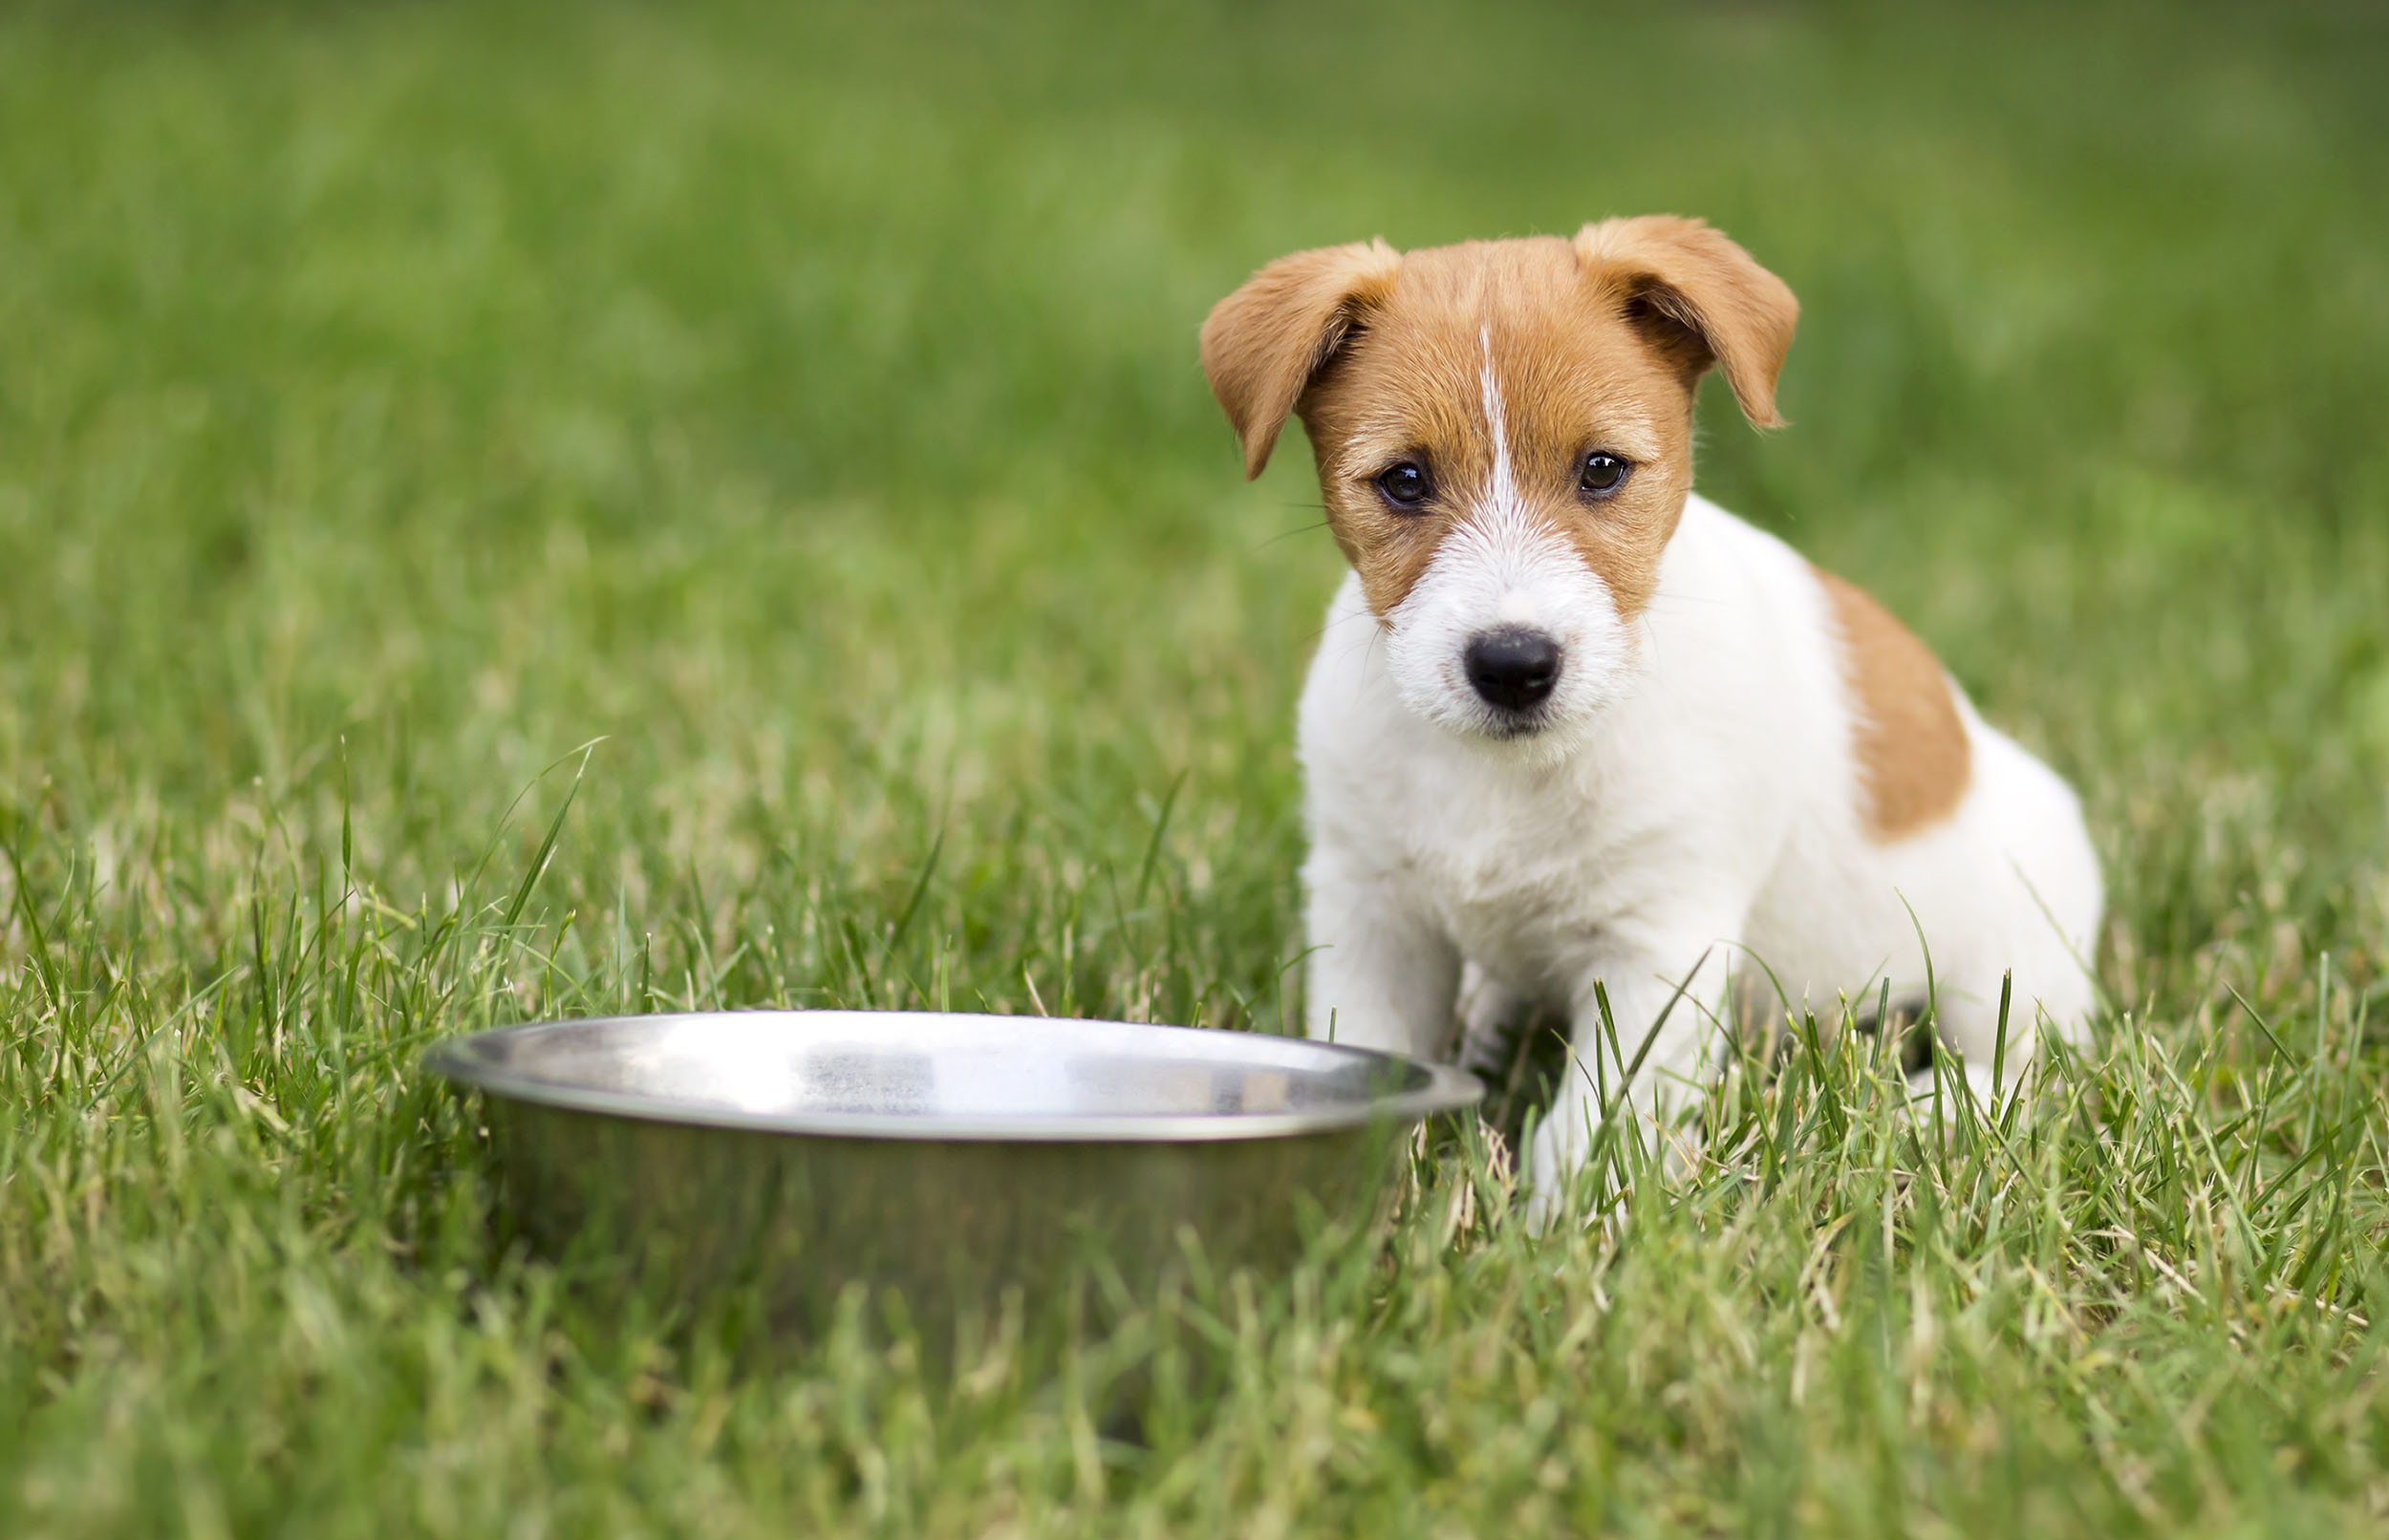 How much should I feed my dog?